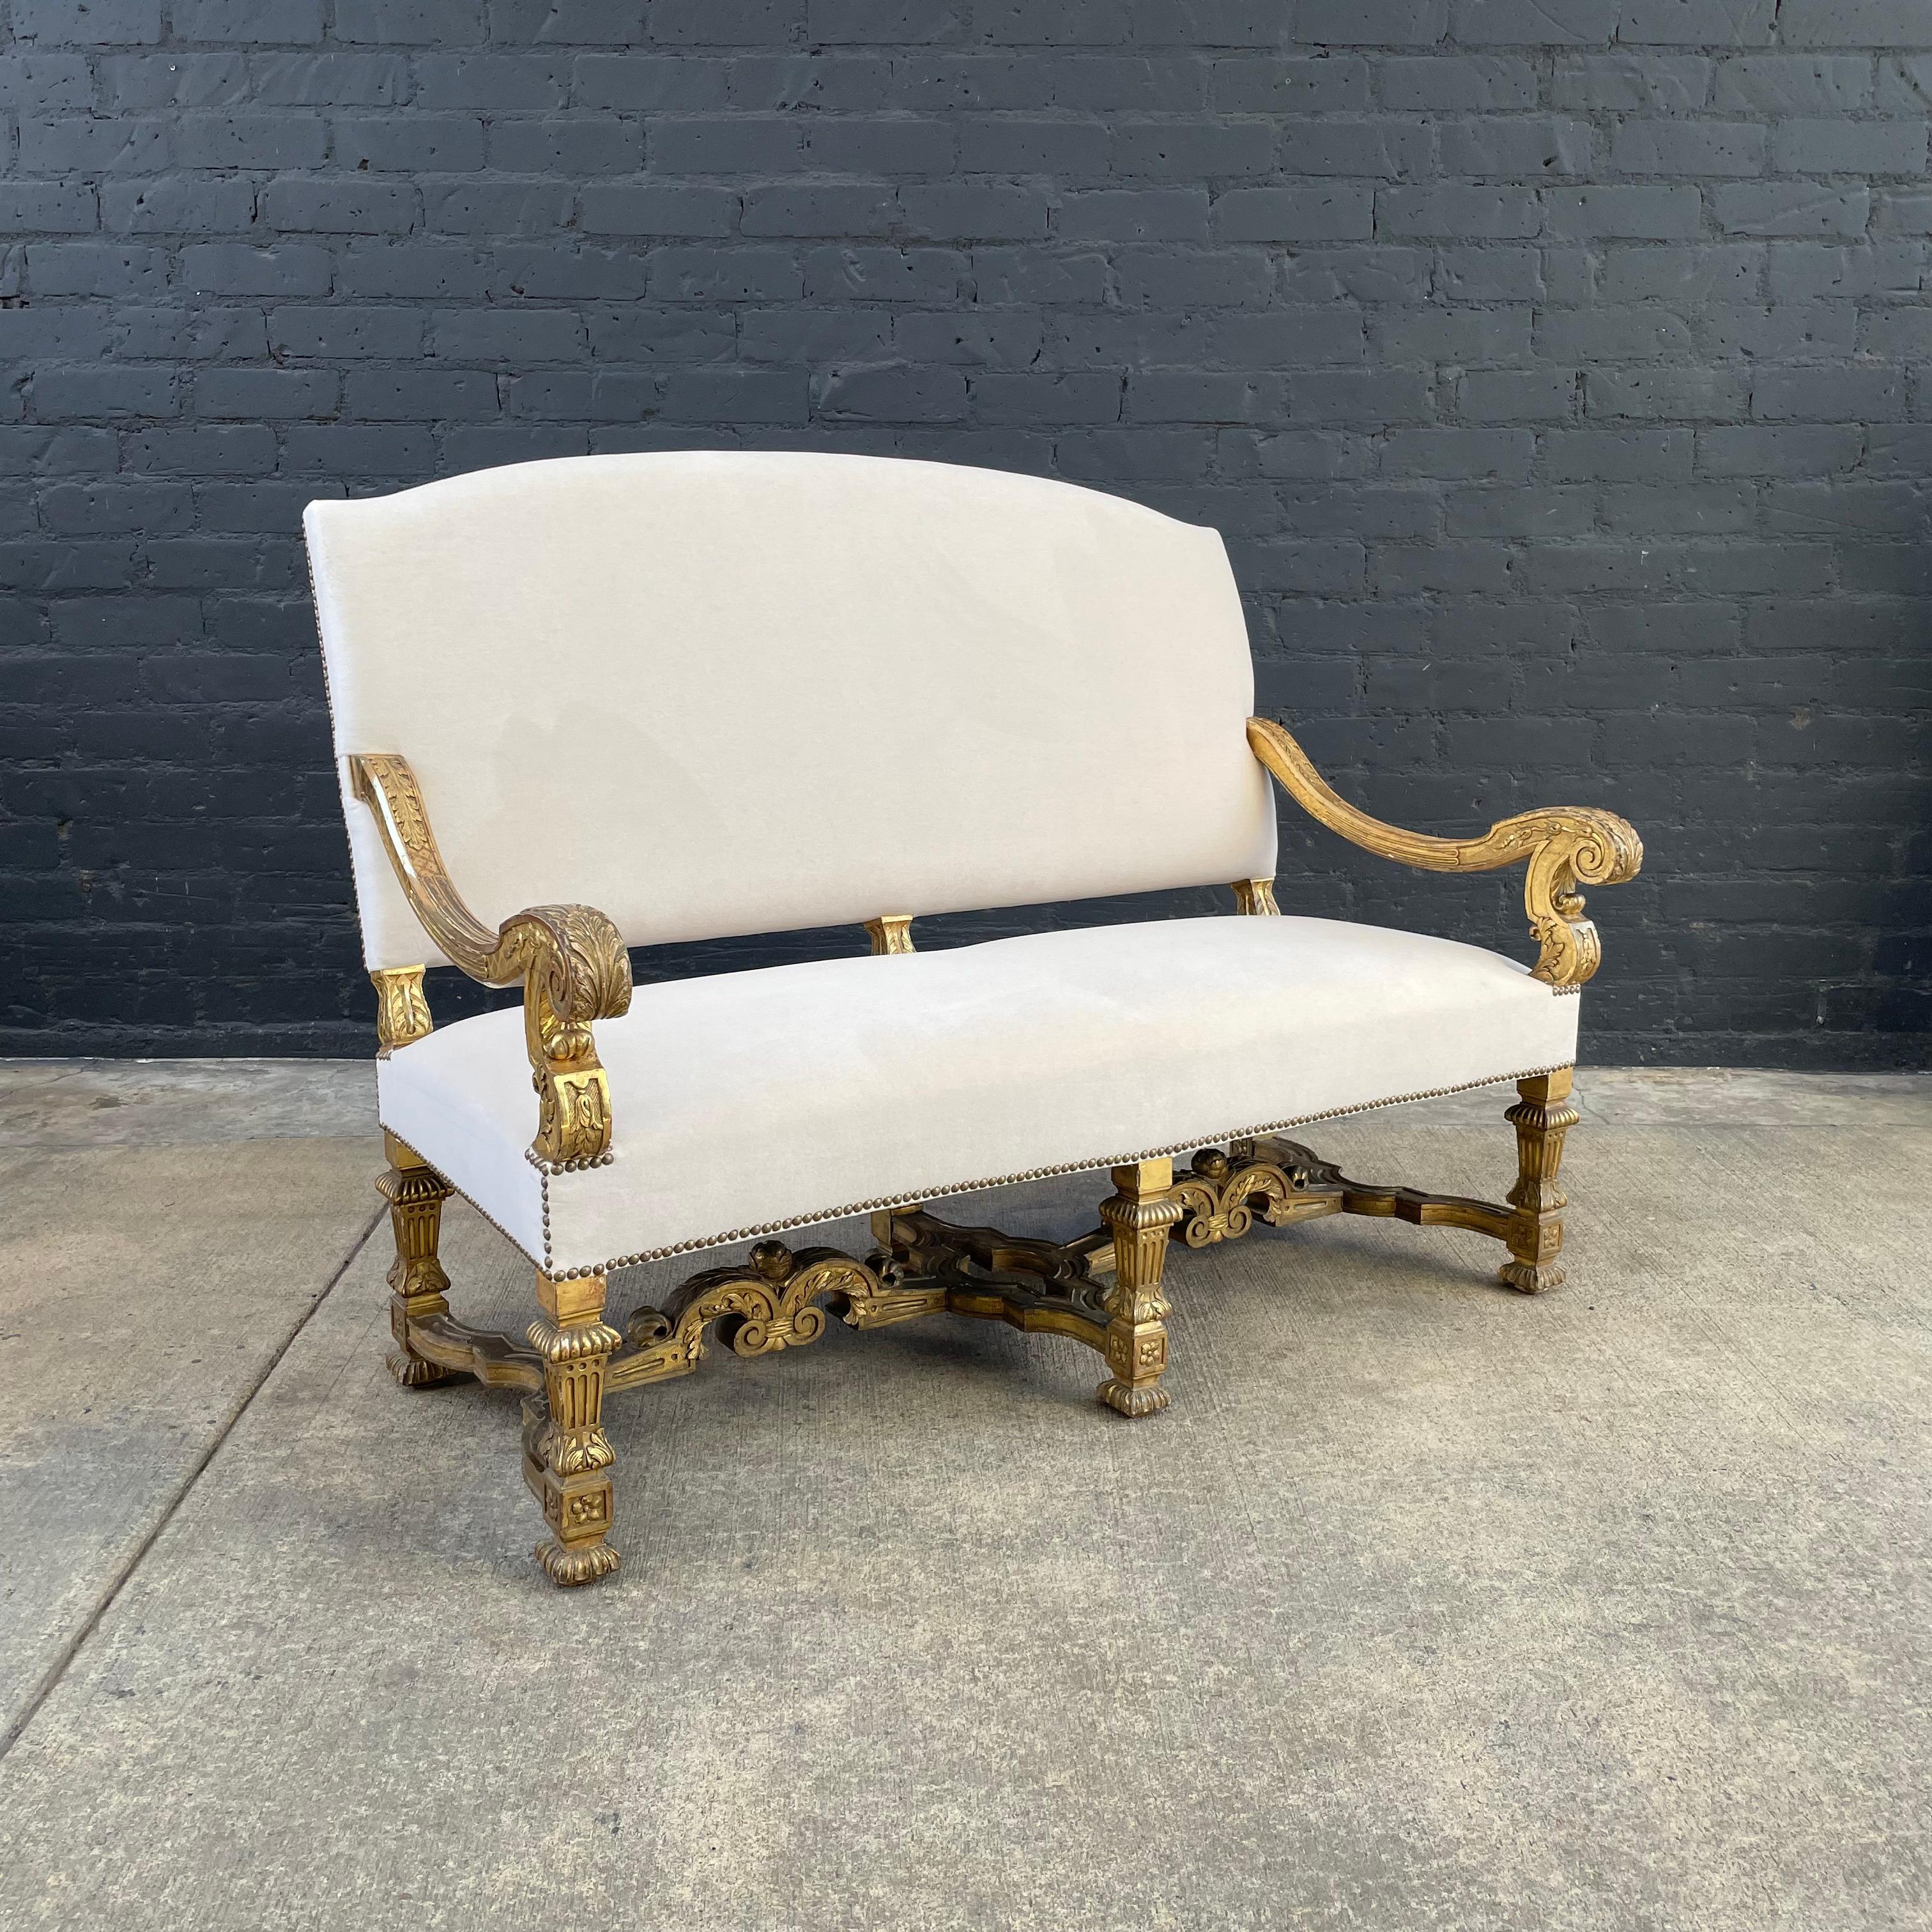 Impactful, French Louis XIV Baroque-style carved giltwood settee, newly upholstered in mohair and finished with an antiqued brass nail head trim. 

This settee’s detailed carved Baroque styling is beautifully highlighted by it’s original water-gild